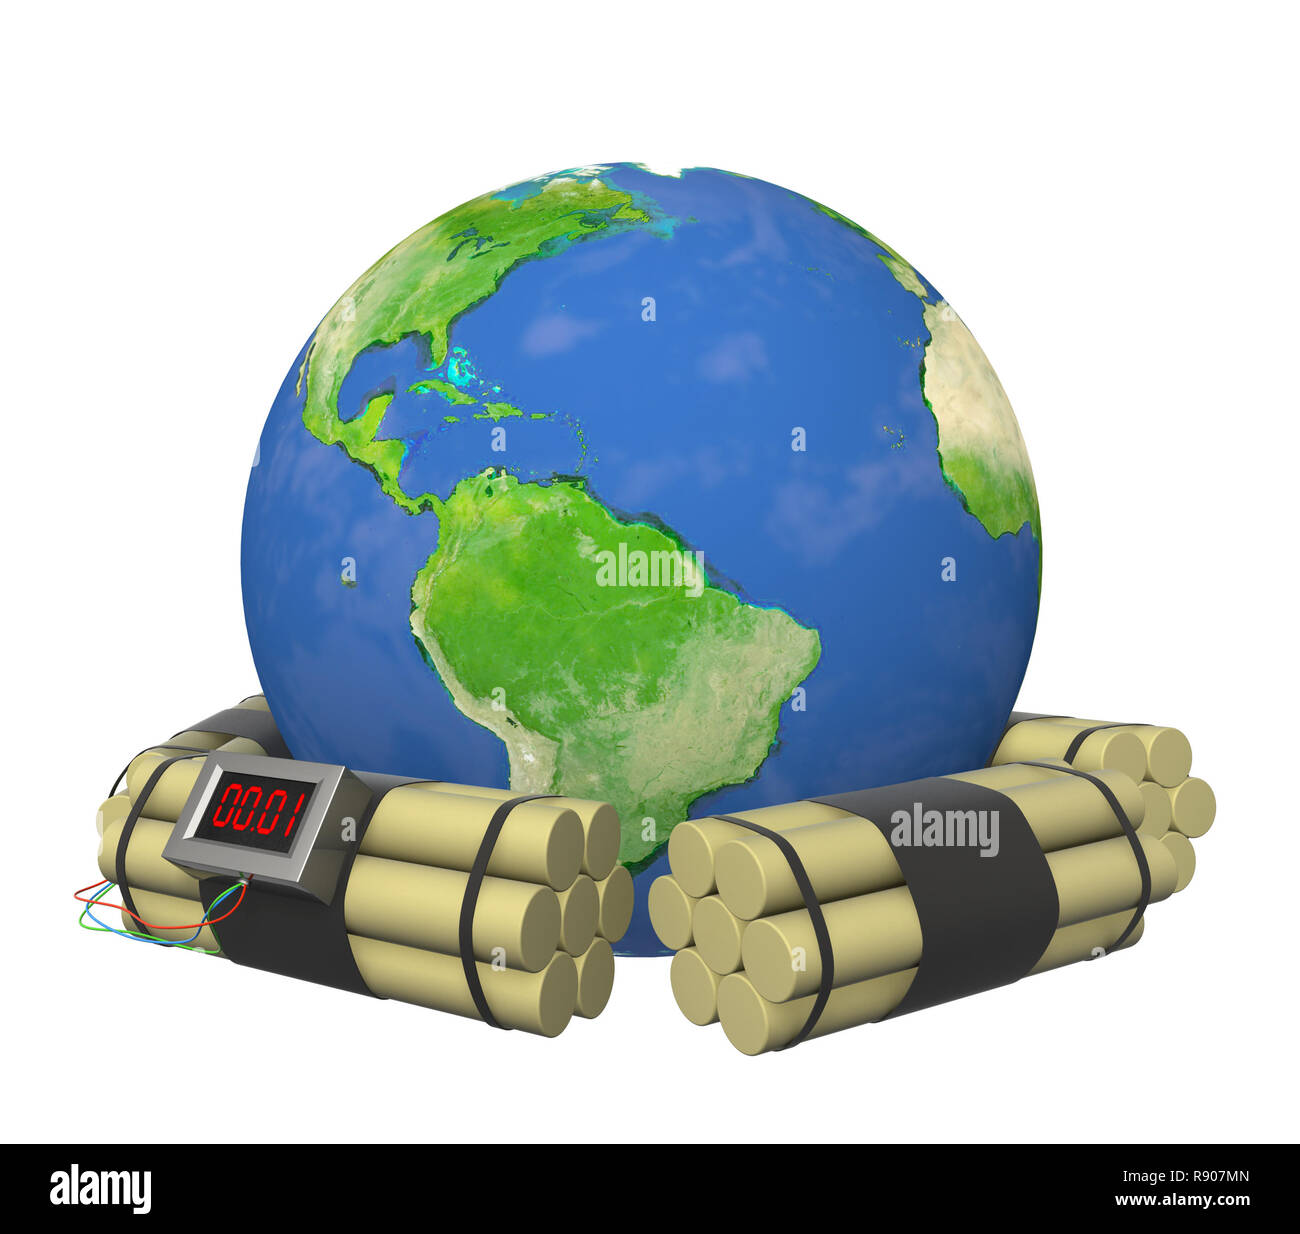 Conceptual image - the Earth under threat of explosion Stock Photo